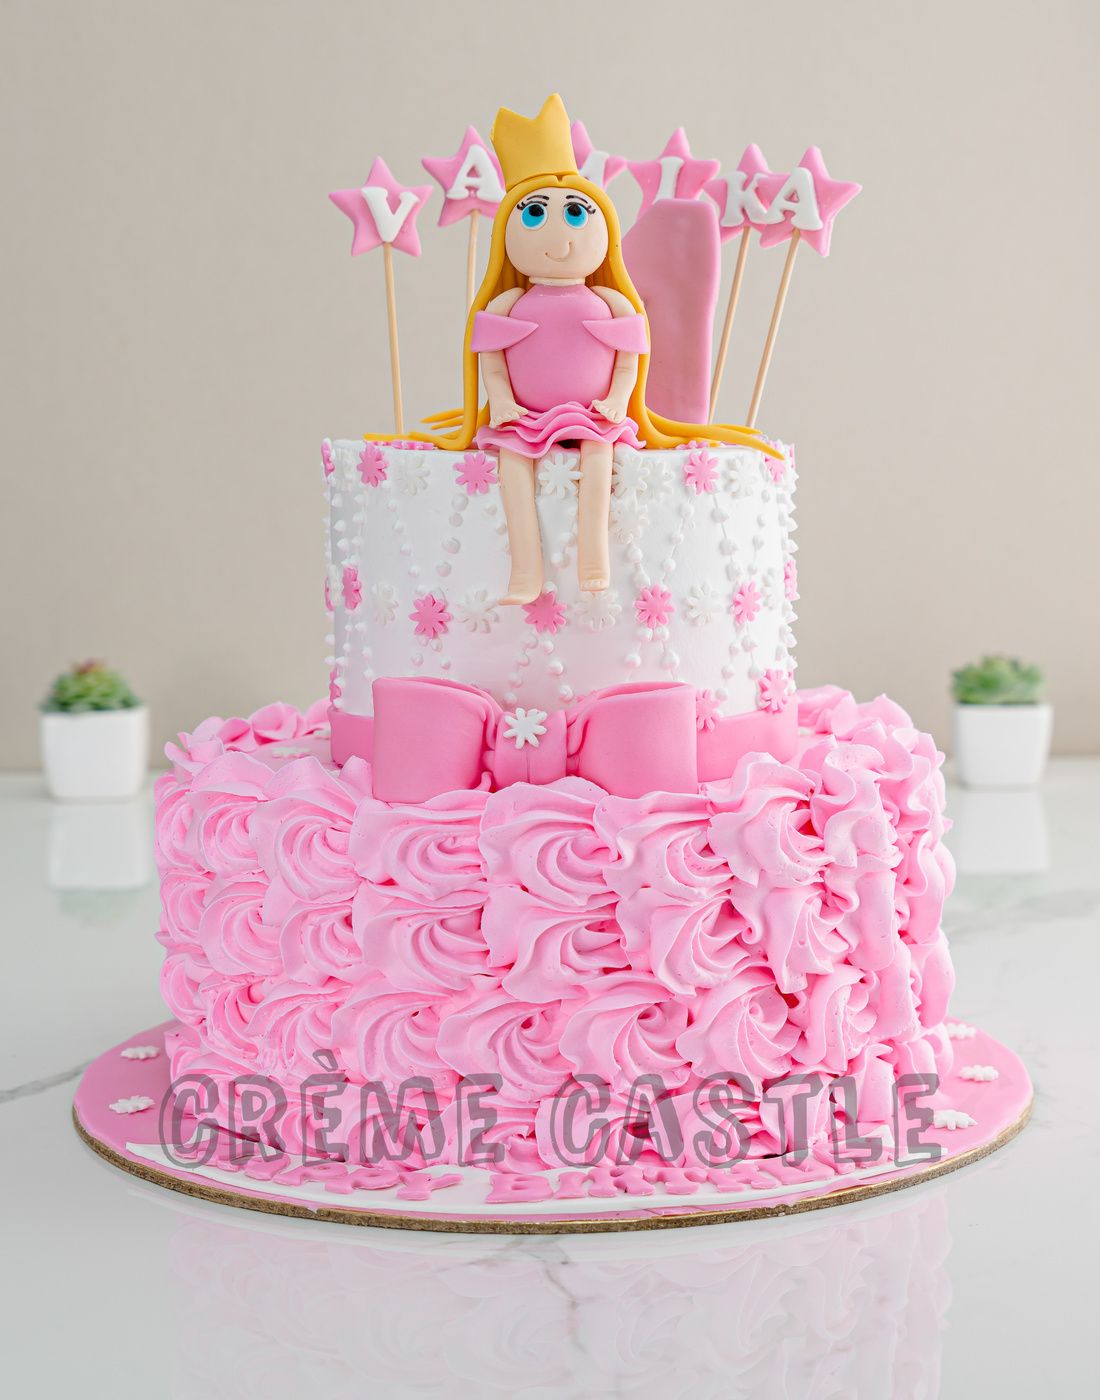 1 YEAR OLD BABY GIRL BIRTHDAY CAKE IDEAS | PICTURESistic - YouTube